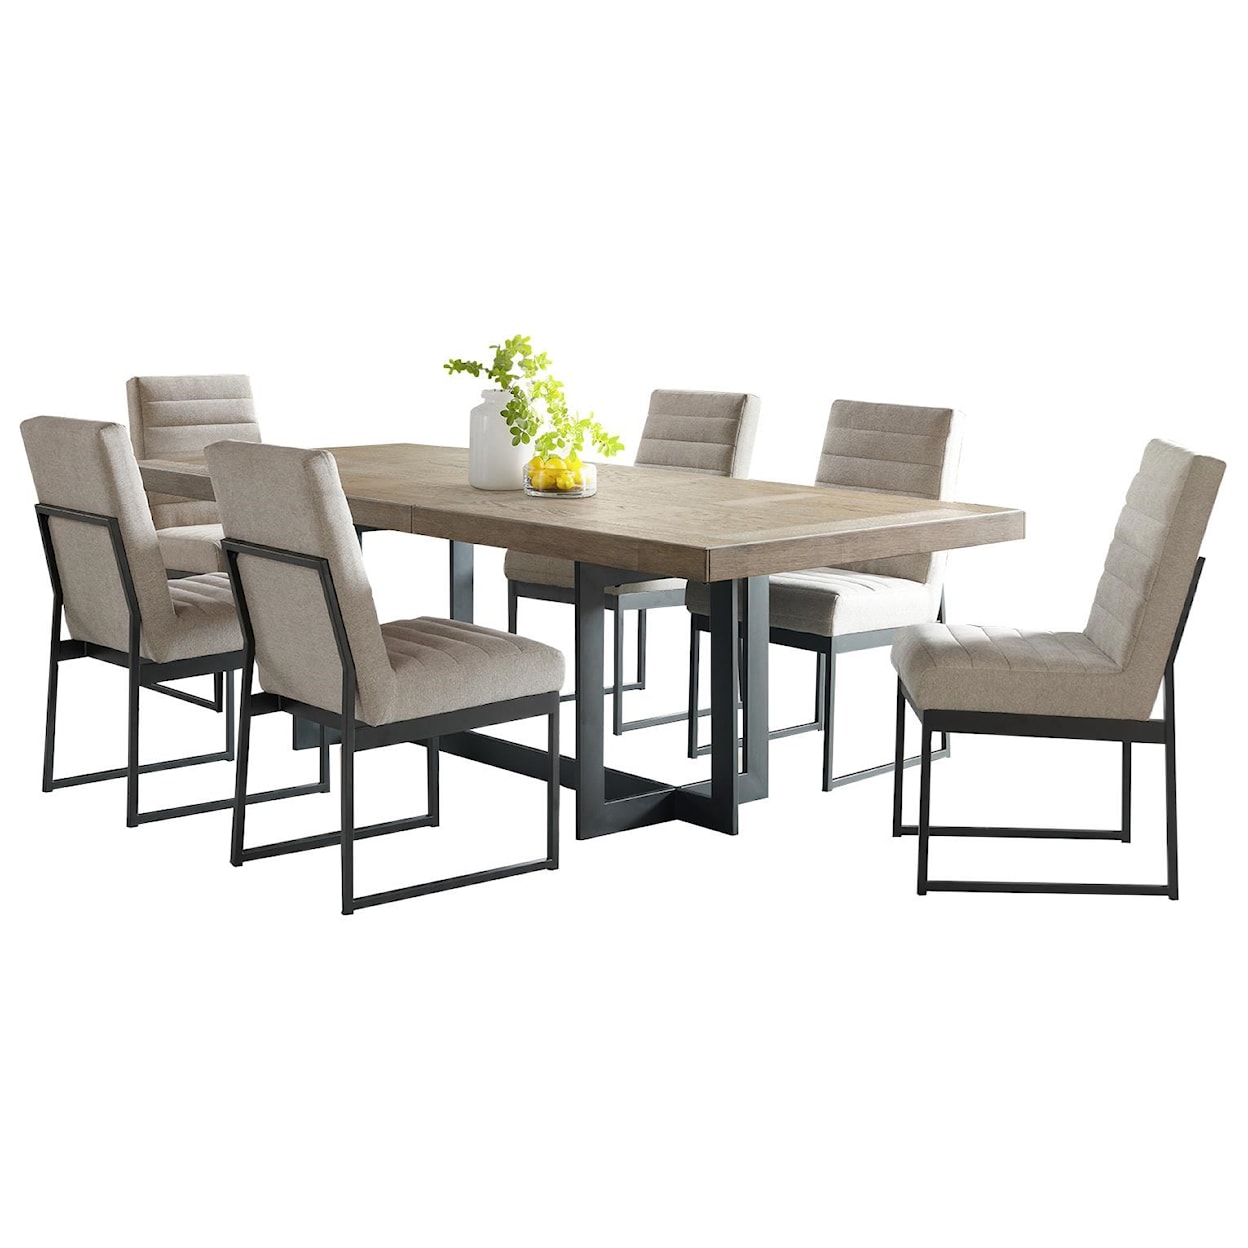 Intercon Eden 7-Piece Table and Chair Set